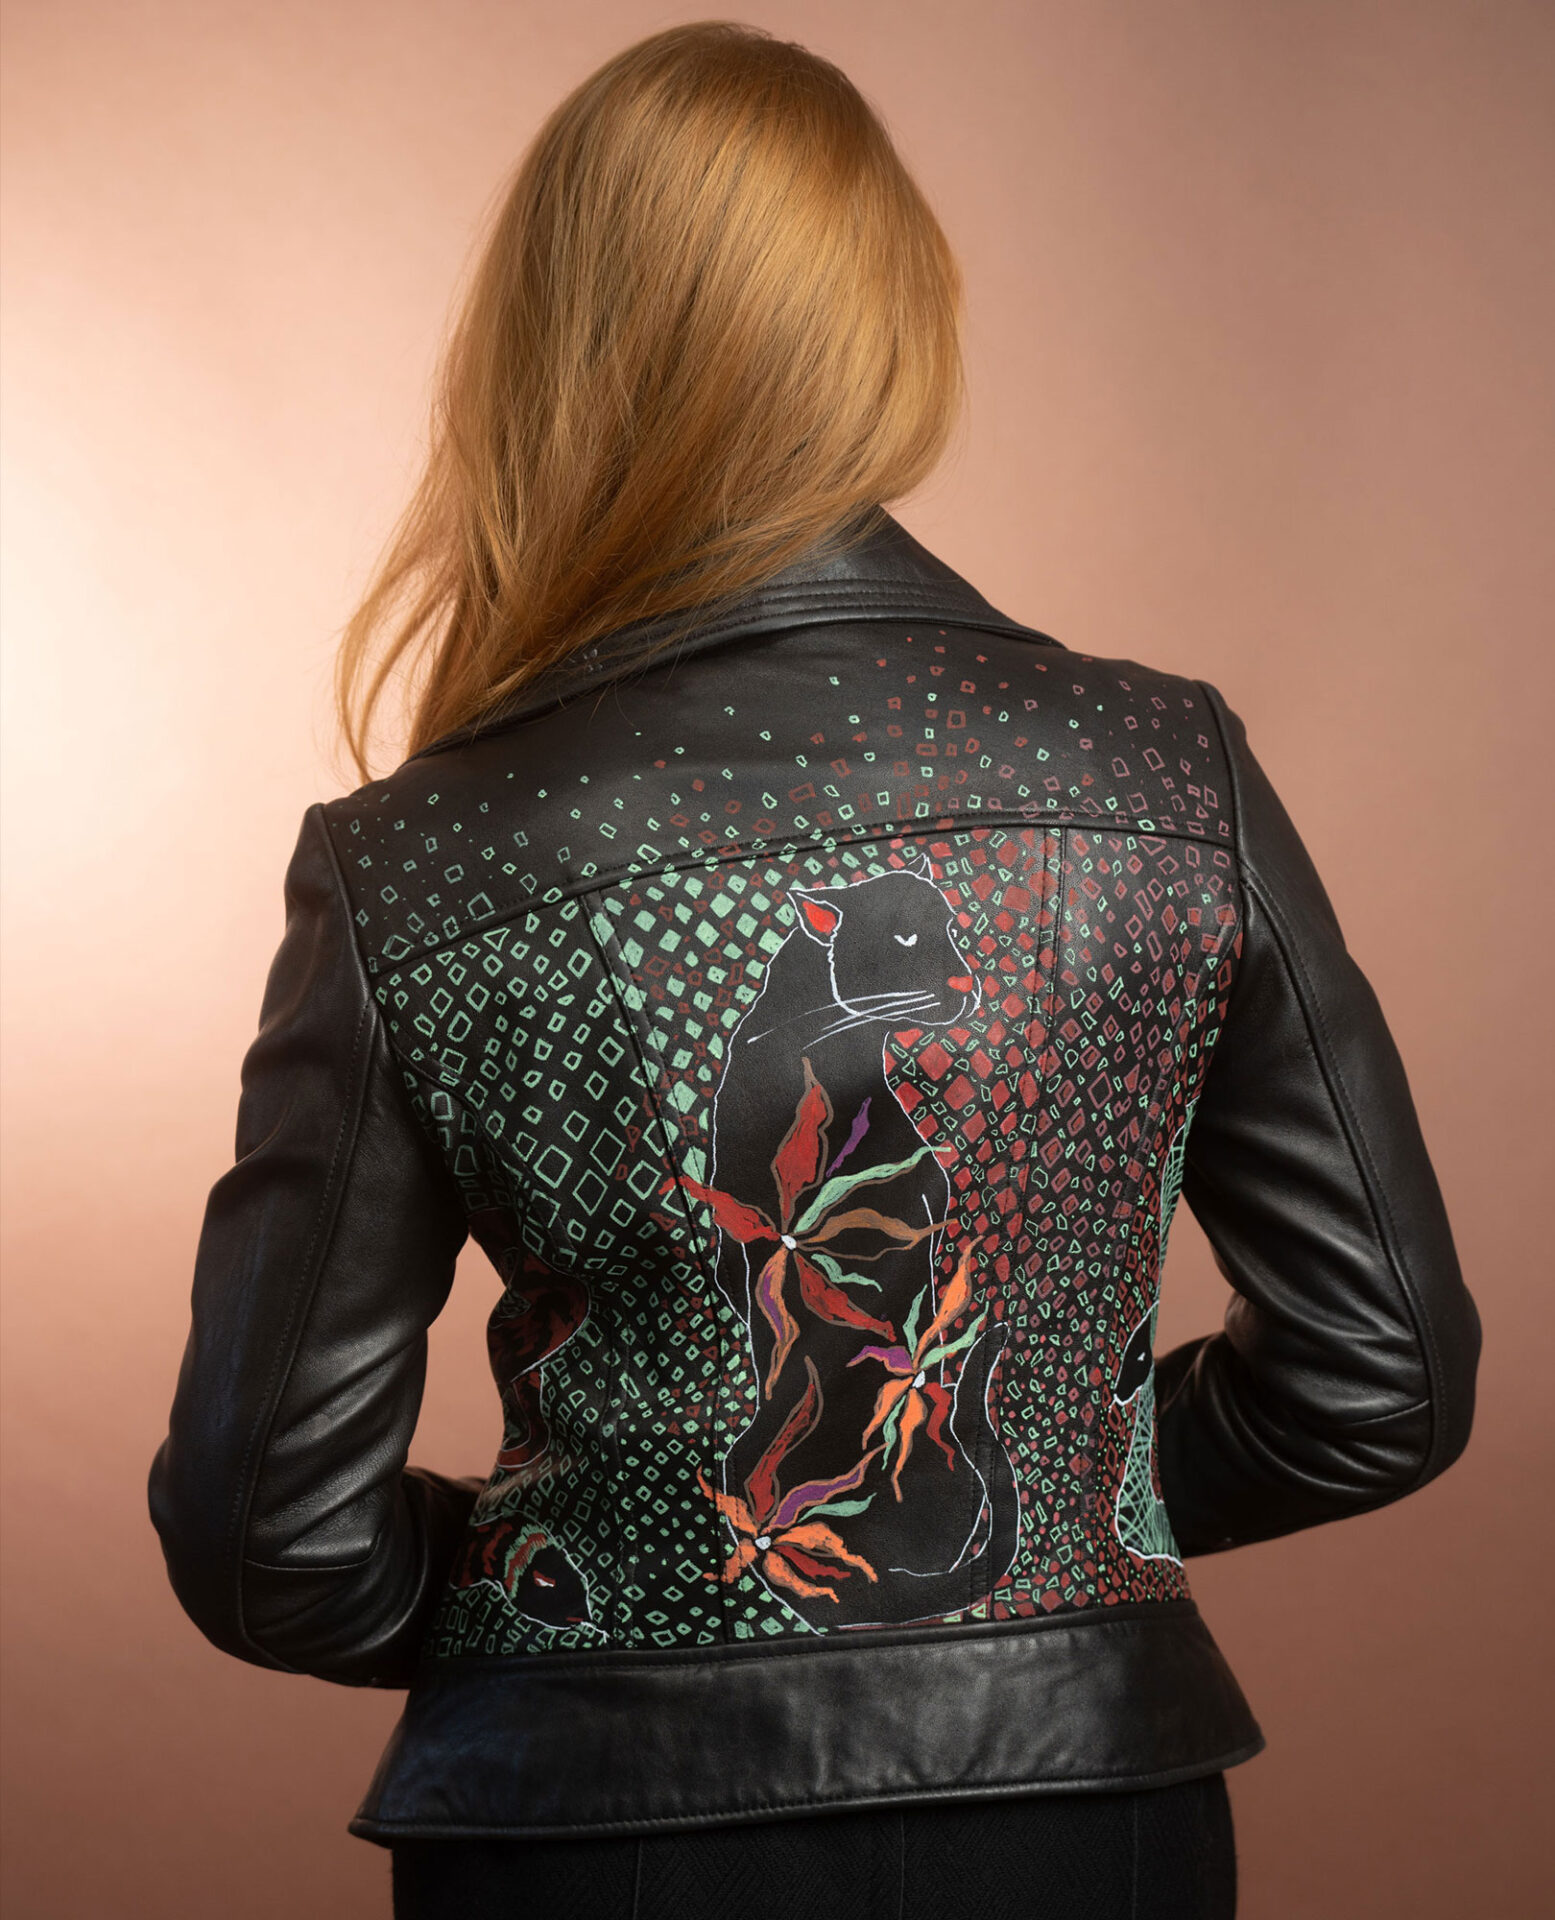 Sparkpick features SPARK + REBEL modular eco fashion brand upcycled second hand jacket leather in sustainable fashion on Etsy